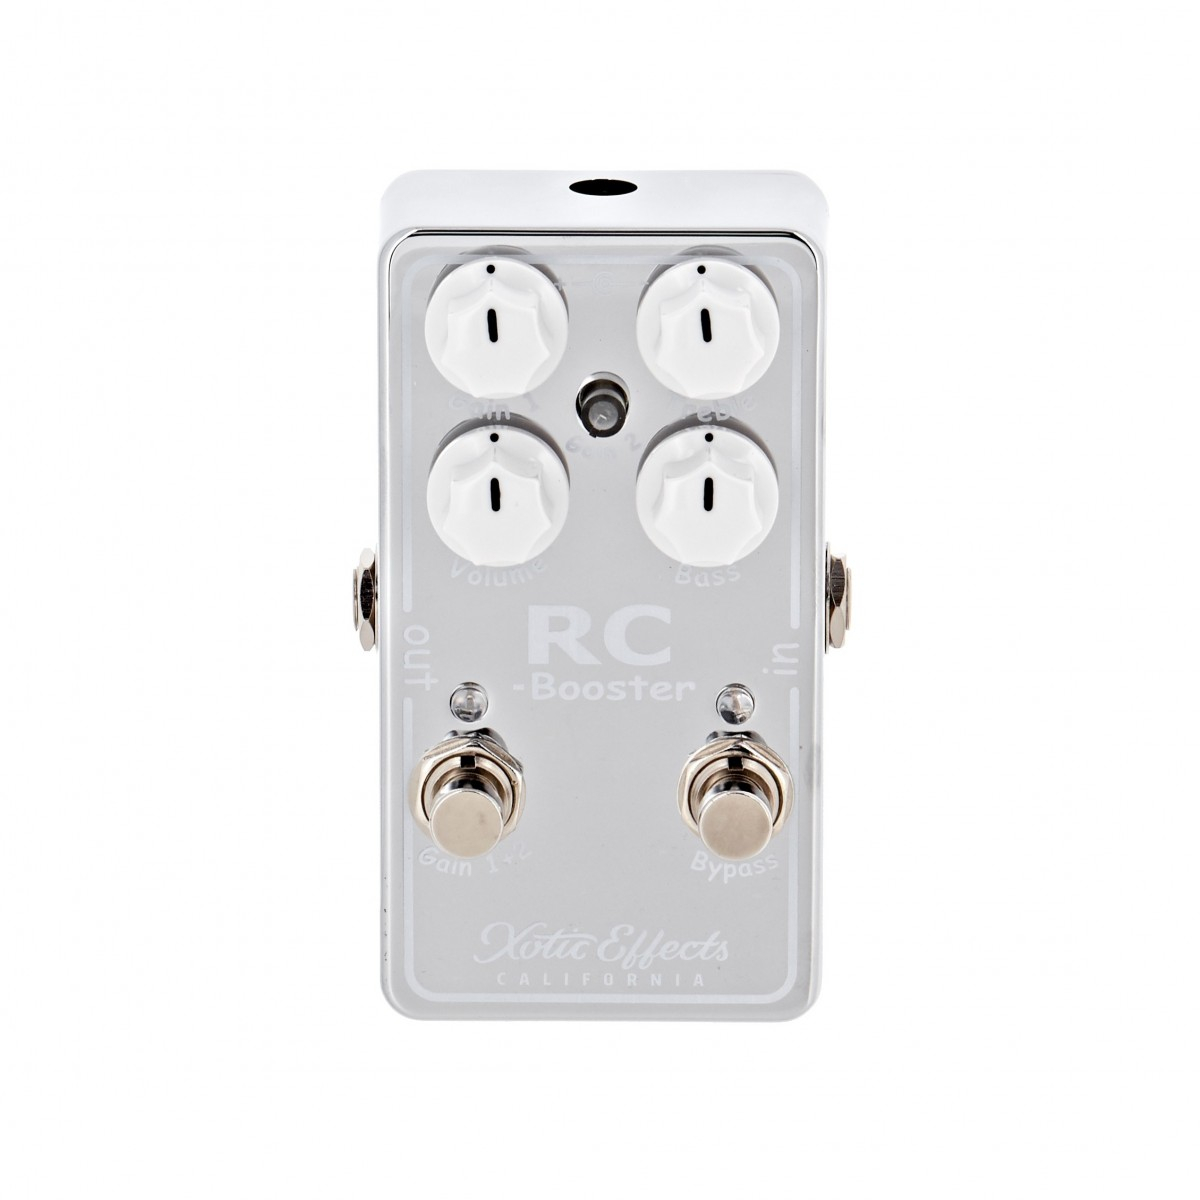 RC Booster V2 | Effects & Pedals Xotic California | The Guitar